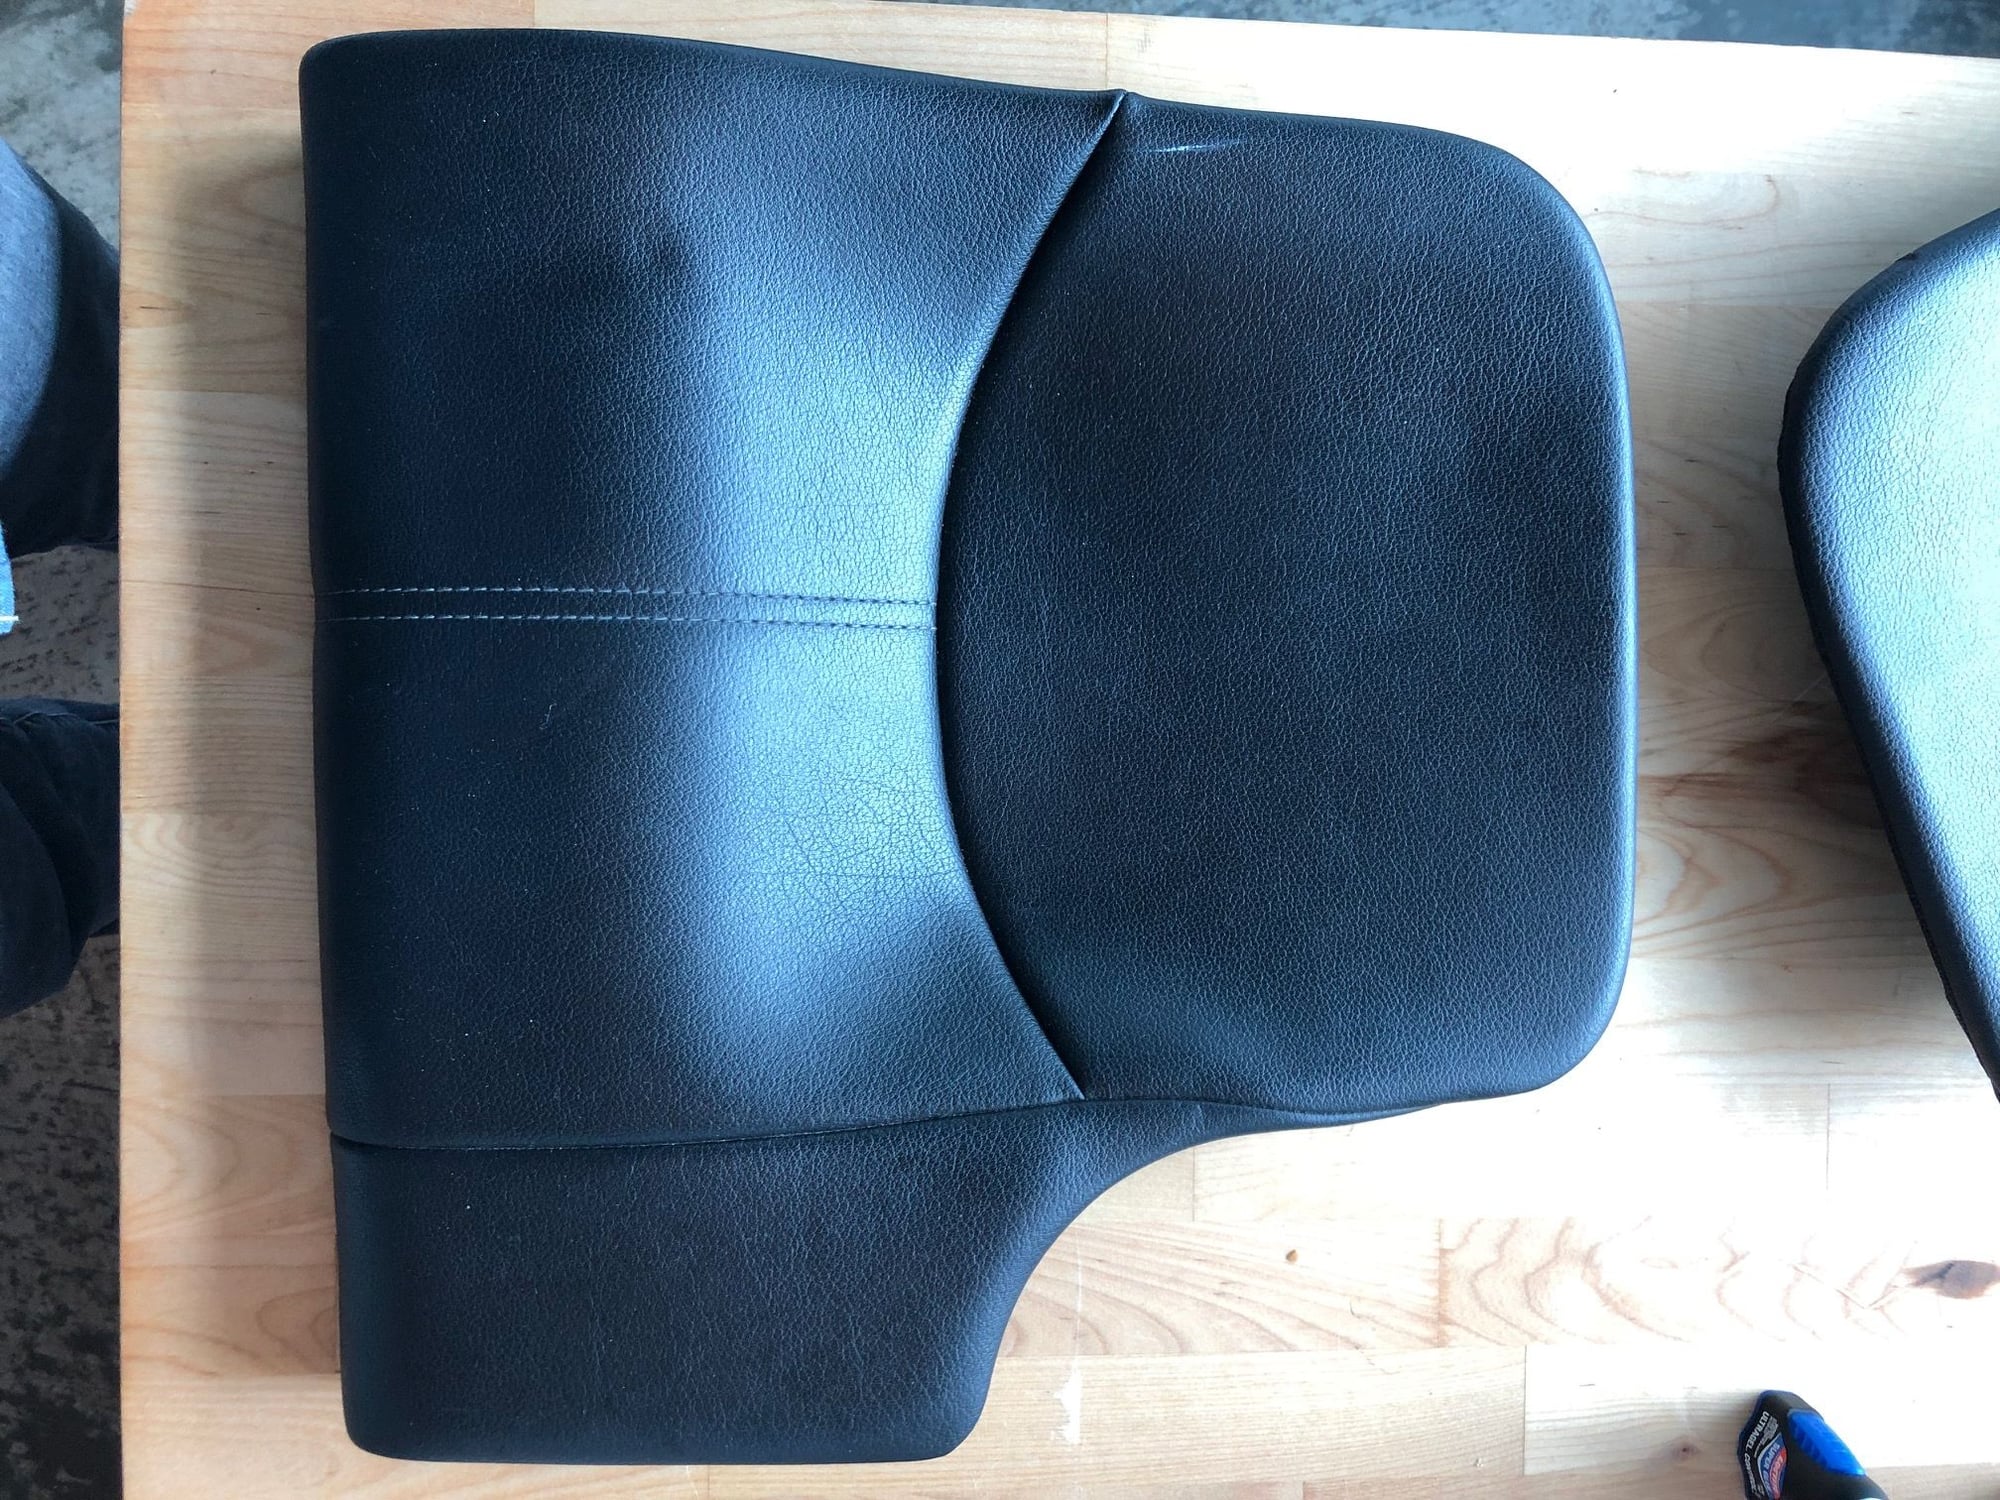 Interior/Upholstery - 997 rear seats and mats - Used - 2006 to 2014 Porsche 911 - Jersey City, NJ 07306, United States